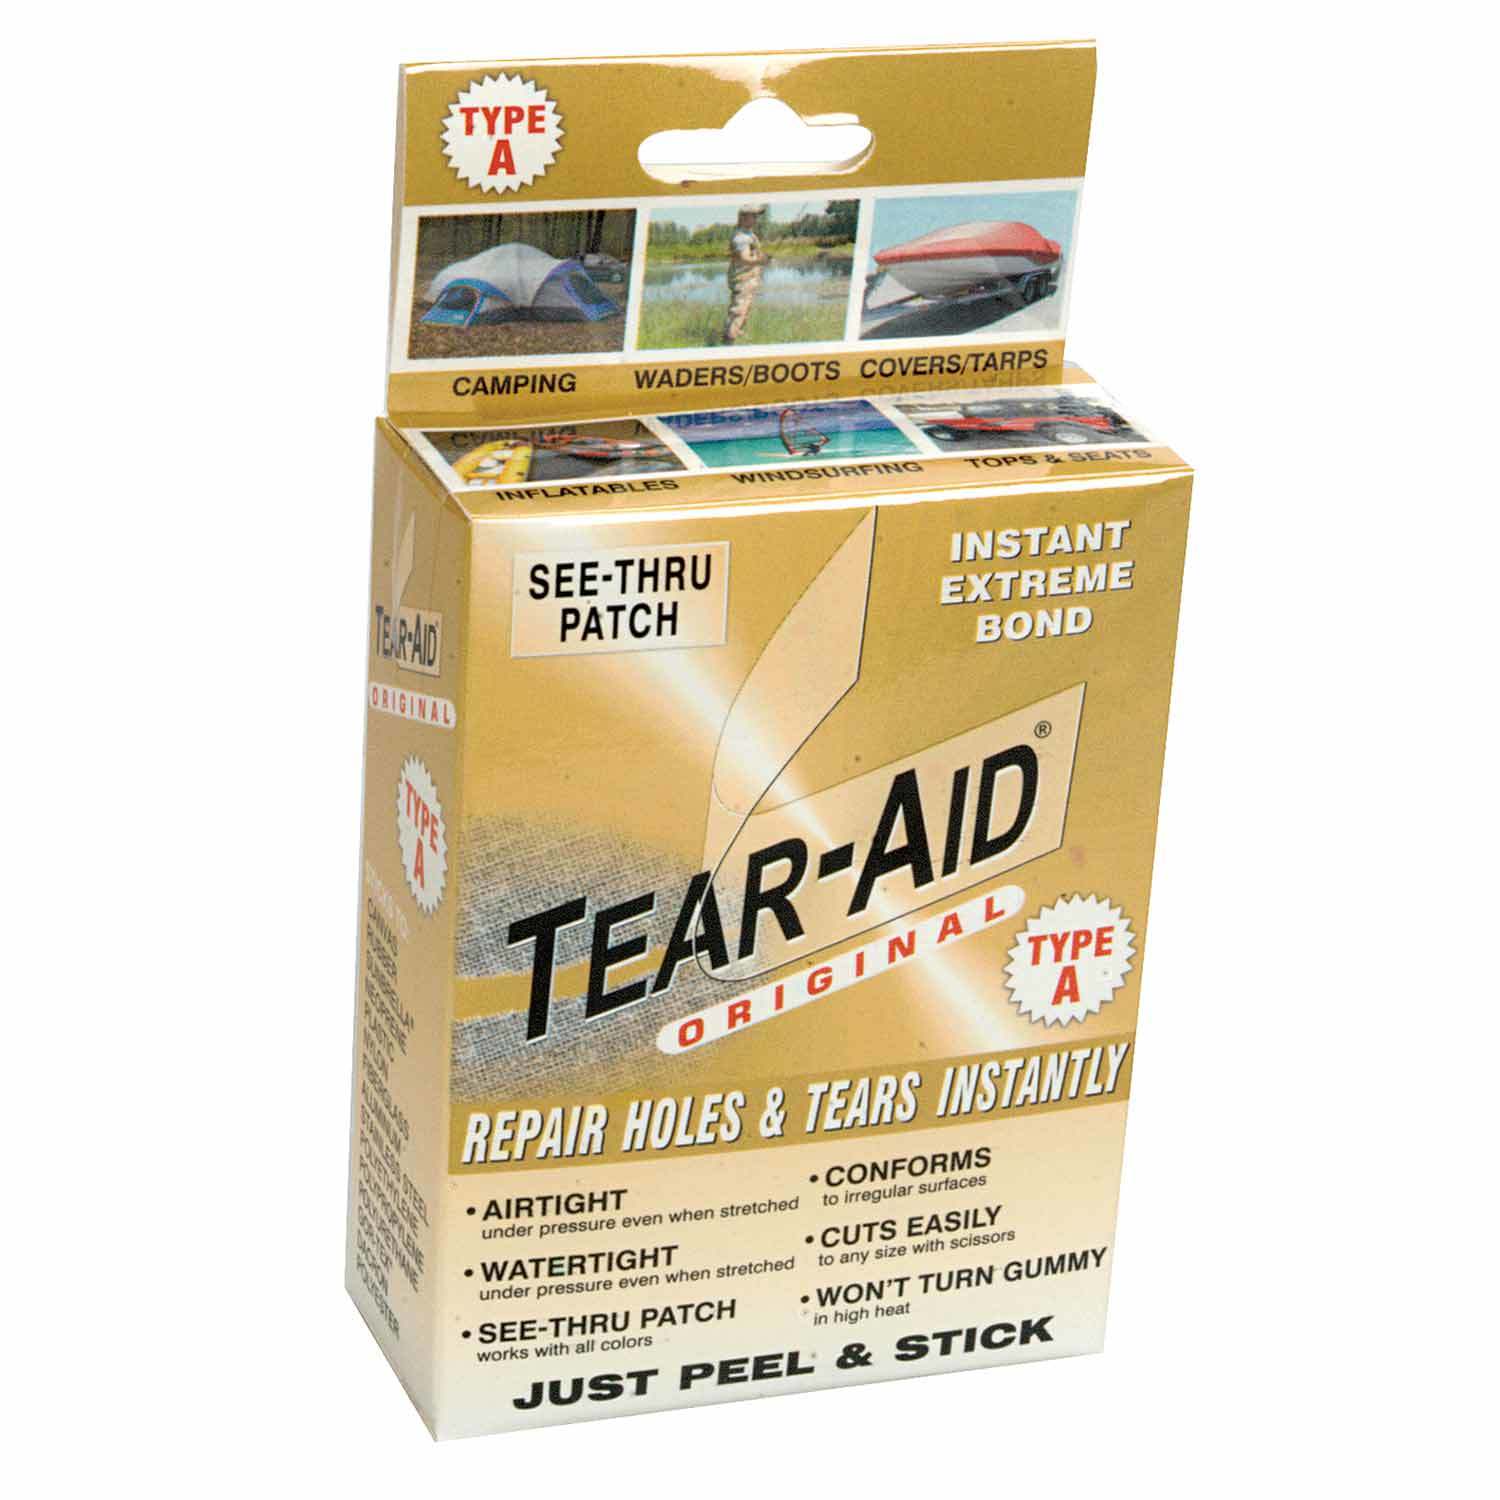 TEAR-AID Fabric Repair Kit, Type A Clear Patch for Canvas, Fiberglass,  Leather, Polyester, Nylon & More, Gold Box, 2 Pack - Yahoo Shopping